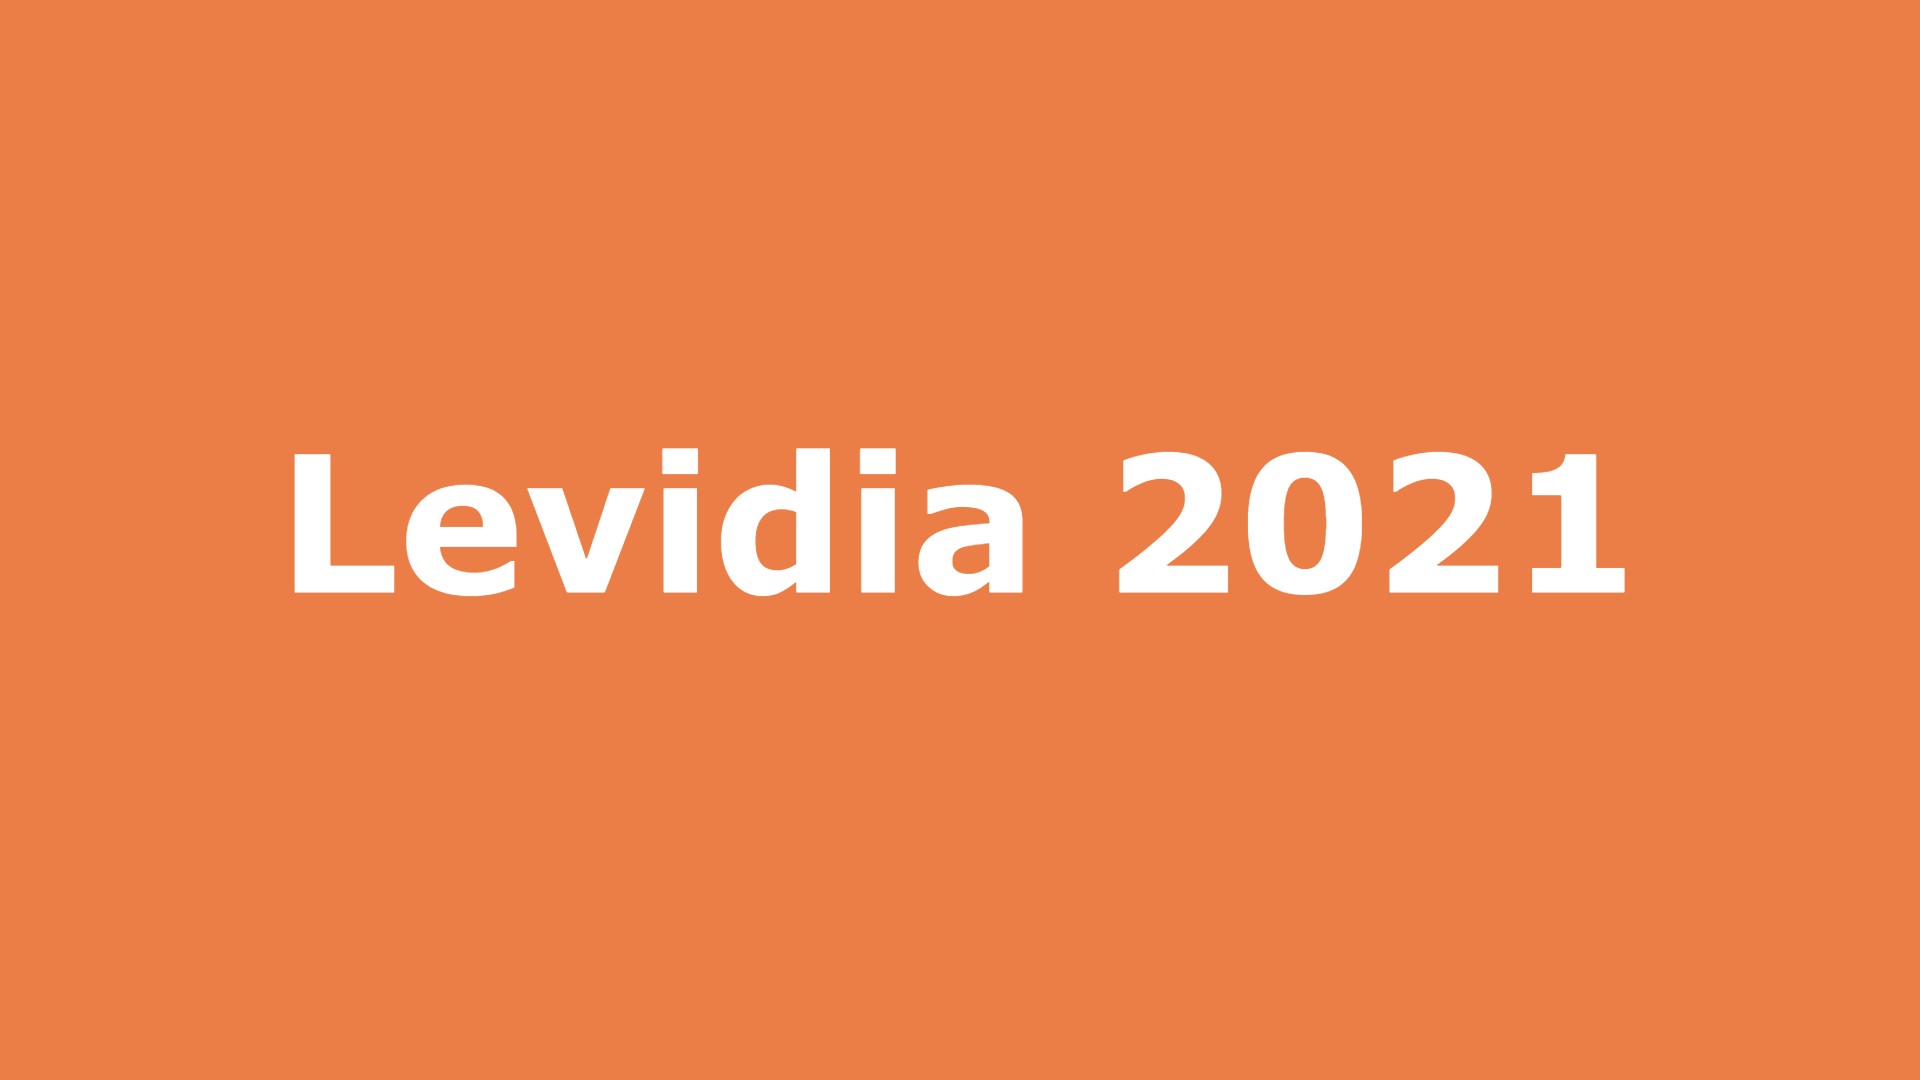 Levidia 2021: Levidia Illegal Movies HD Download Website Trends on Google -...